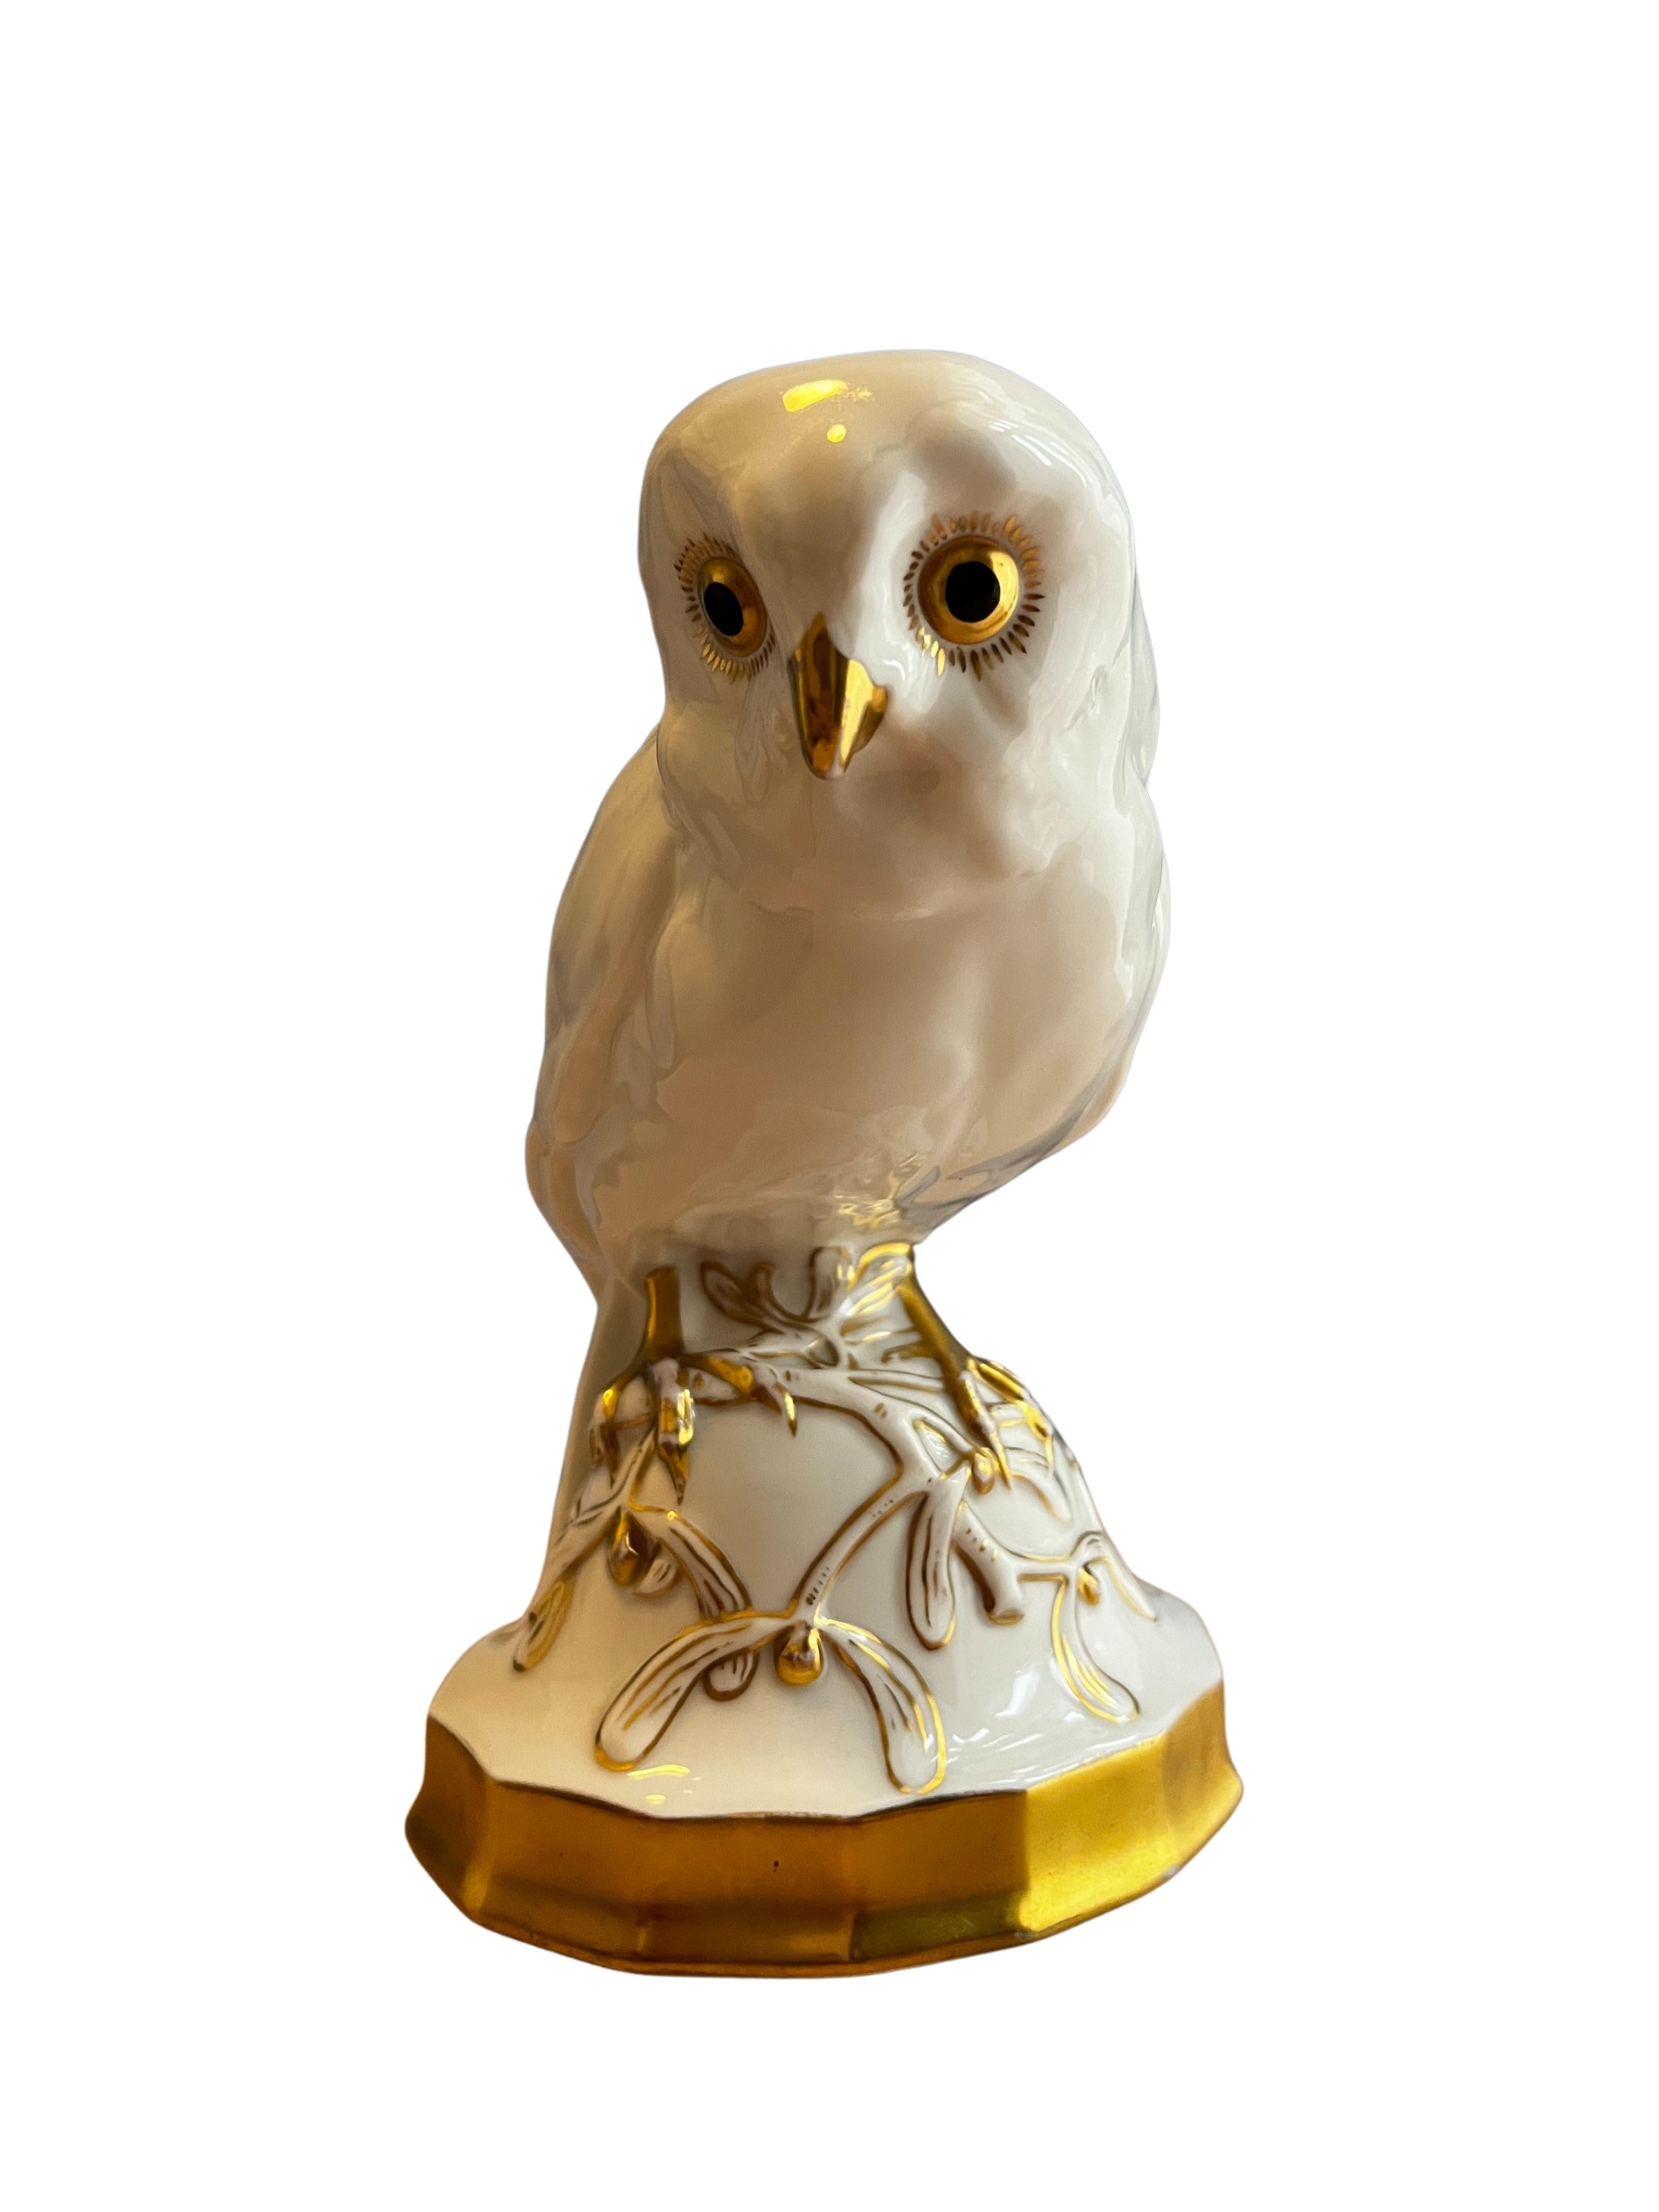 Wonderful perfectly preserved owl sculpture on a pedestal, made of white porcelain, partly gilded, handmade in the world famous German porcelain manufactory Hutschenreuther.

The polygonal pedestal has a gilded base, on which lie mistletoe branches,